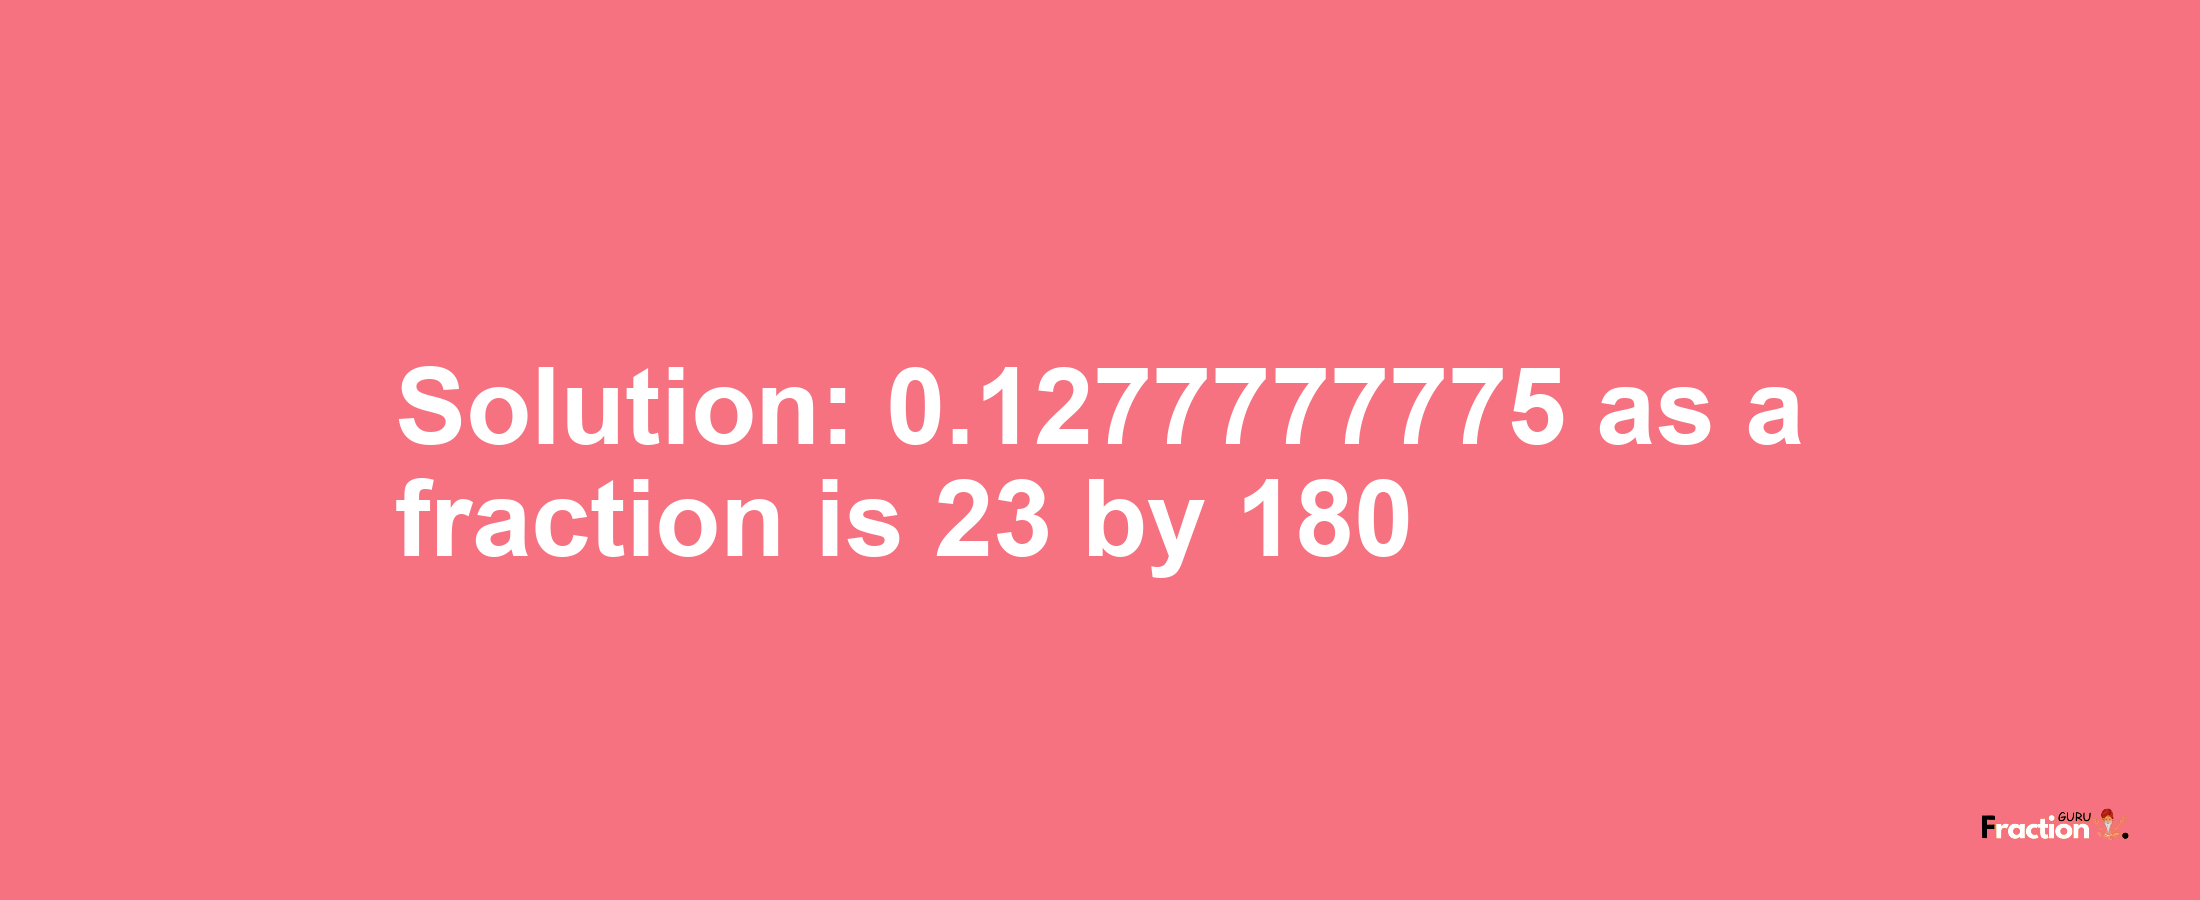 Solution:0.1277777775 as a fraction is 23/180